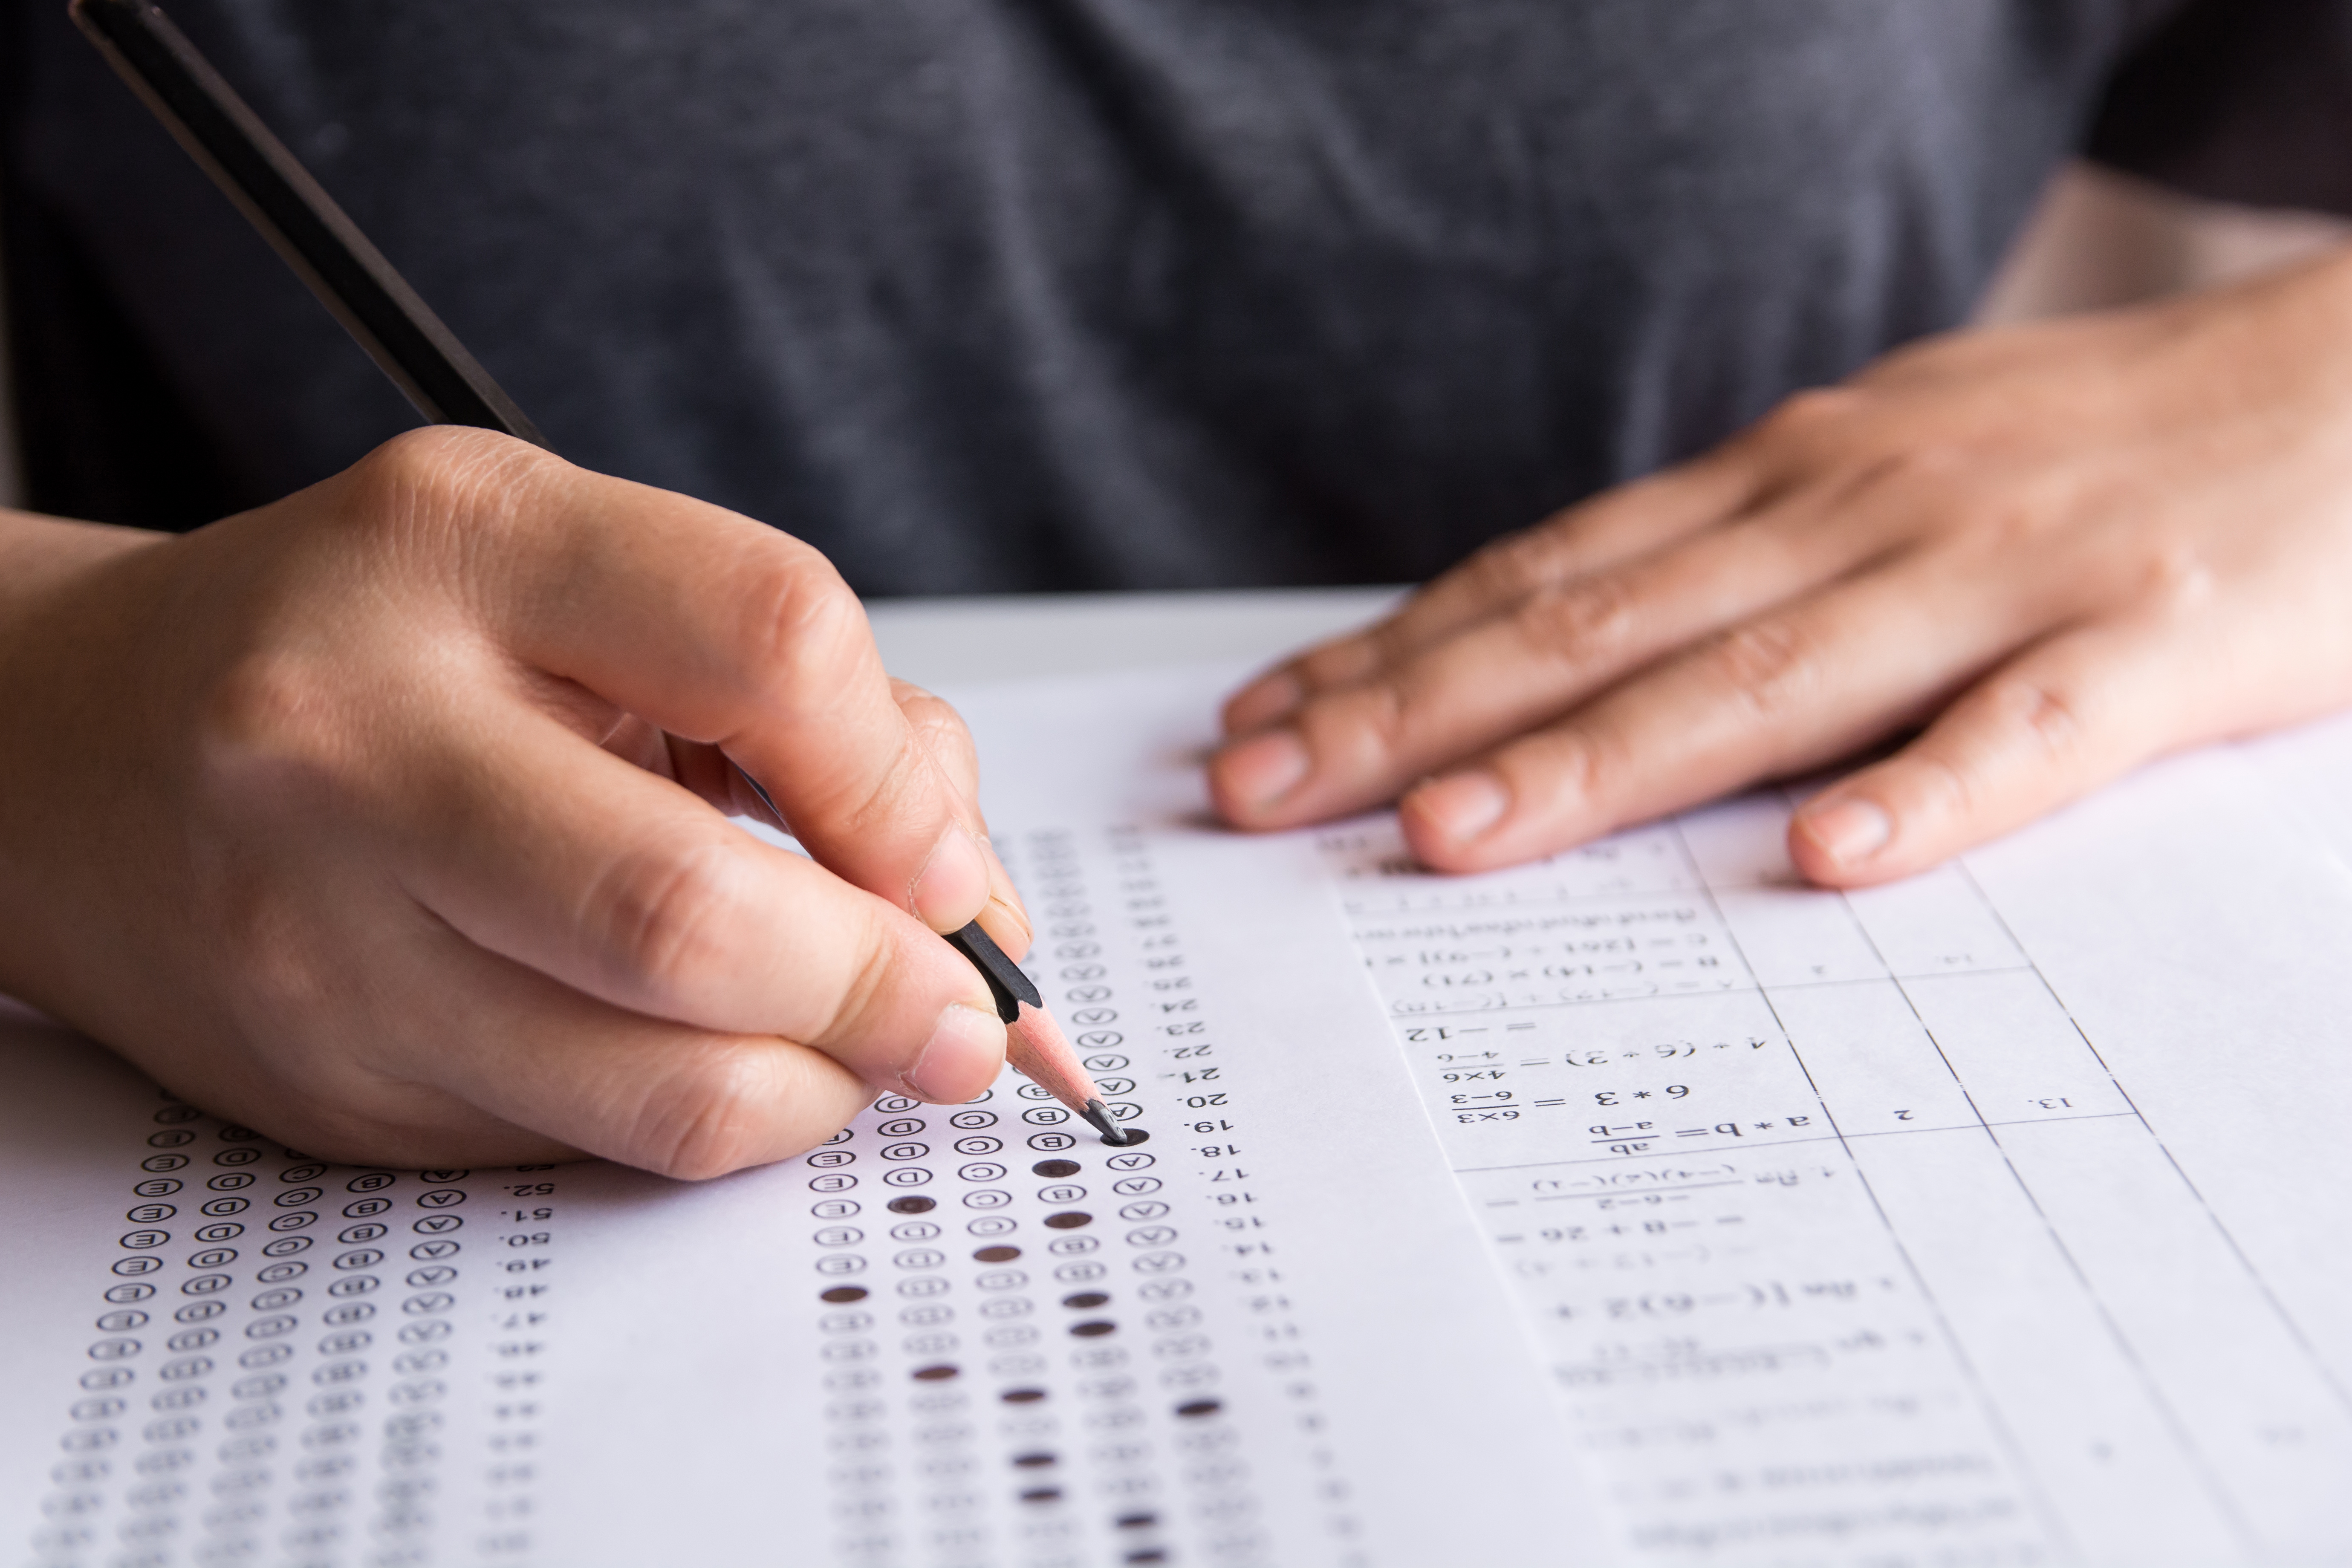 7 Solid Strategies To Improve Math Test Scores